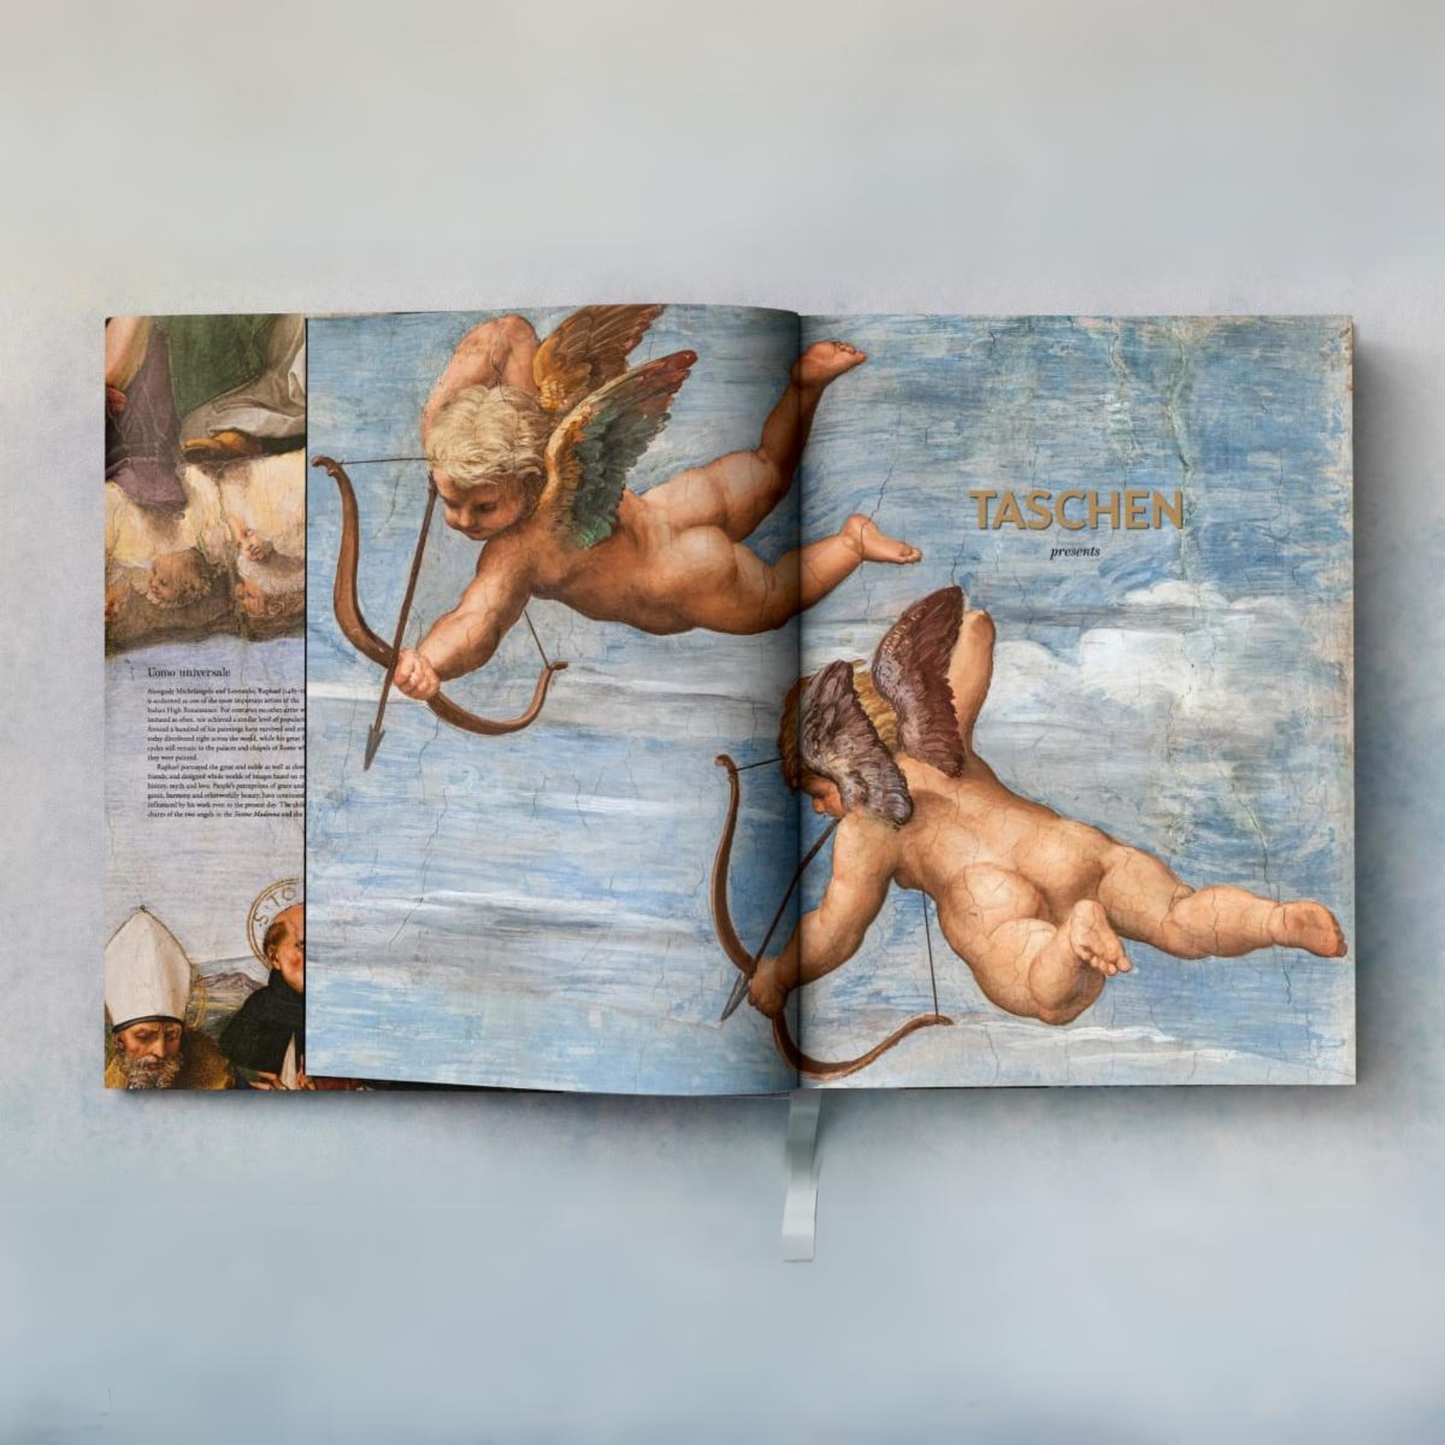 Raphael . The Complete Works